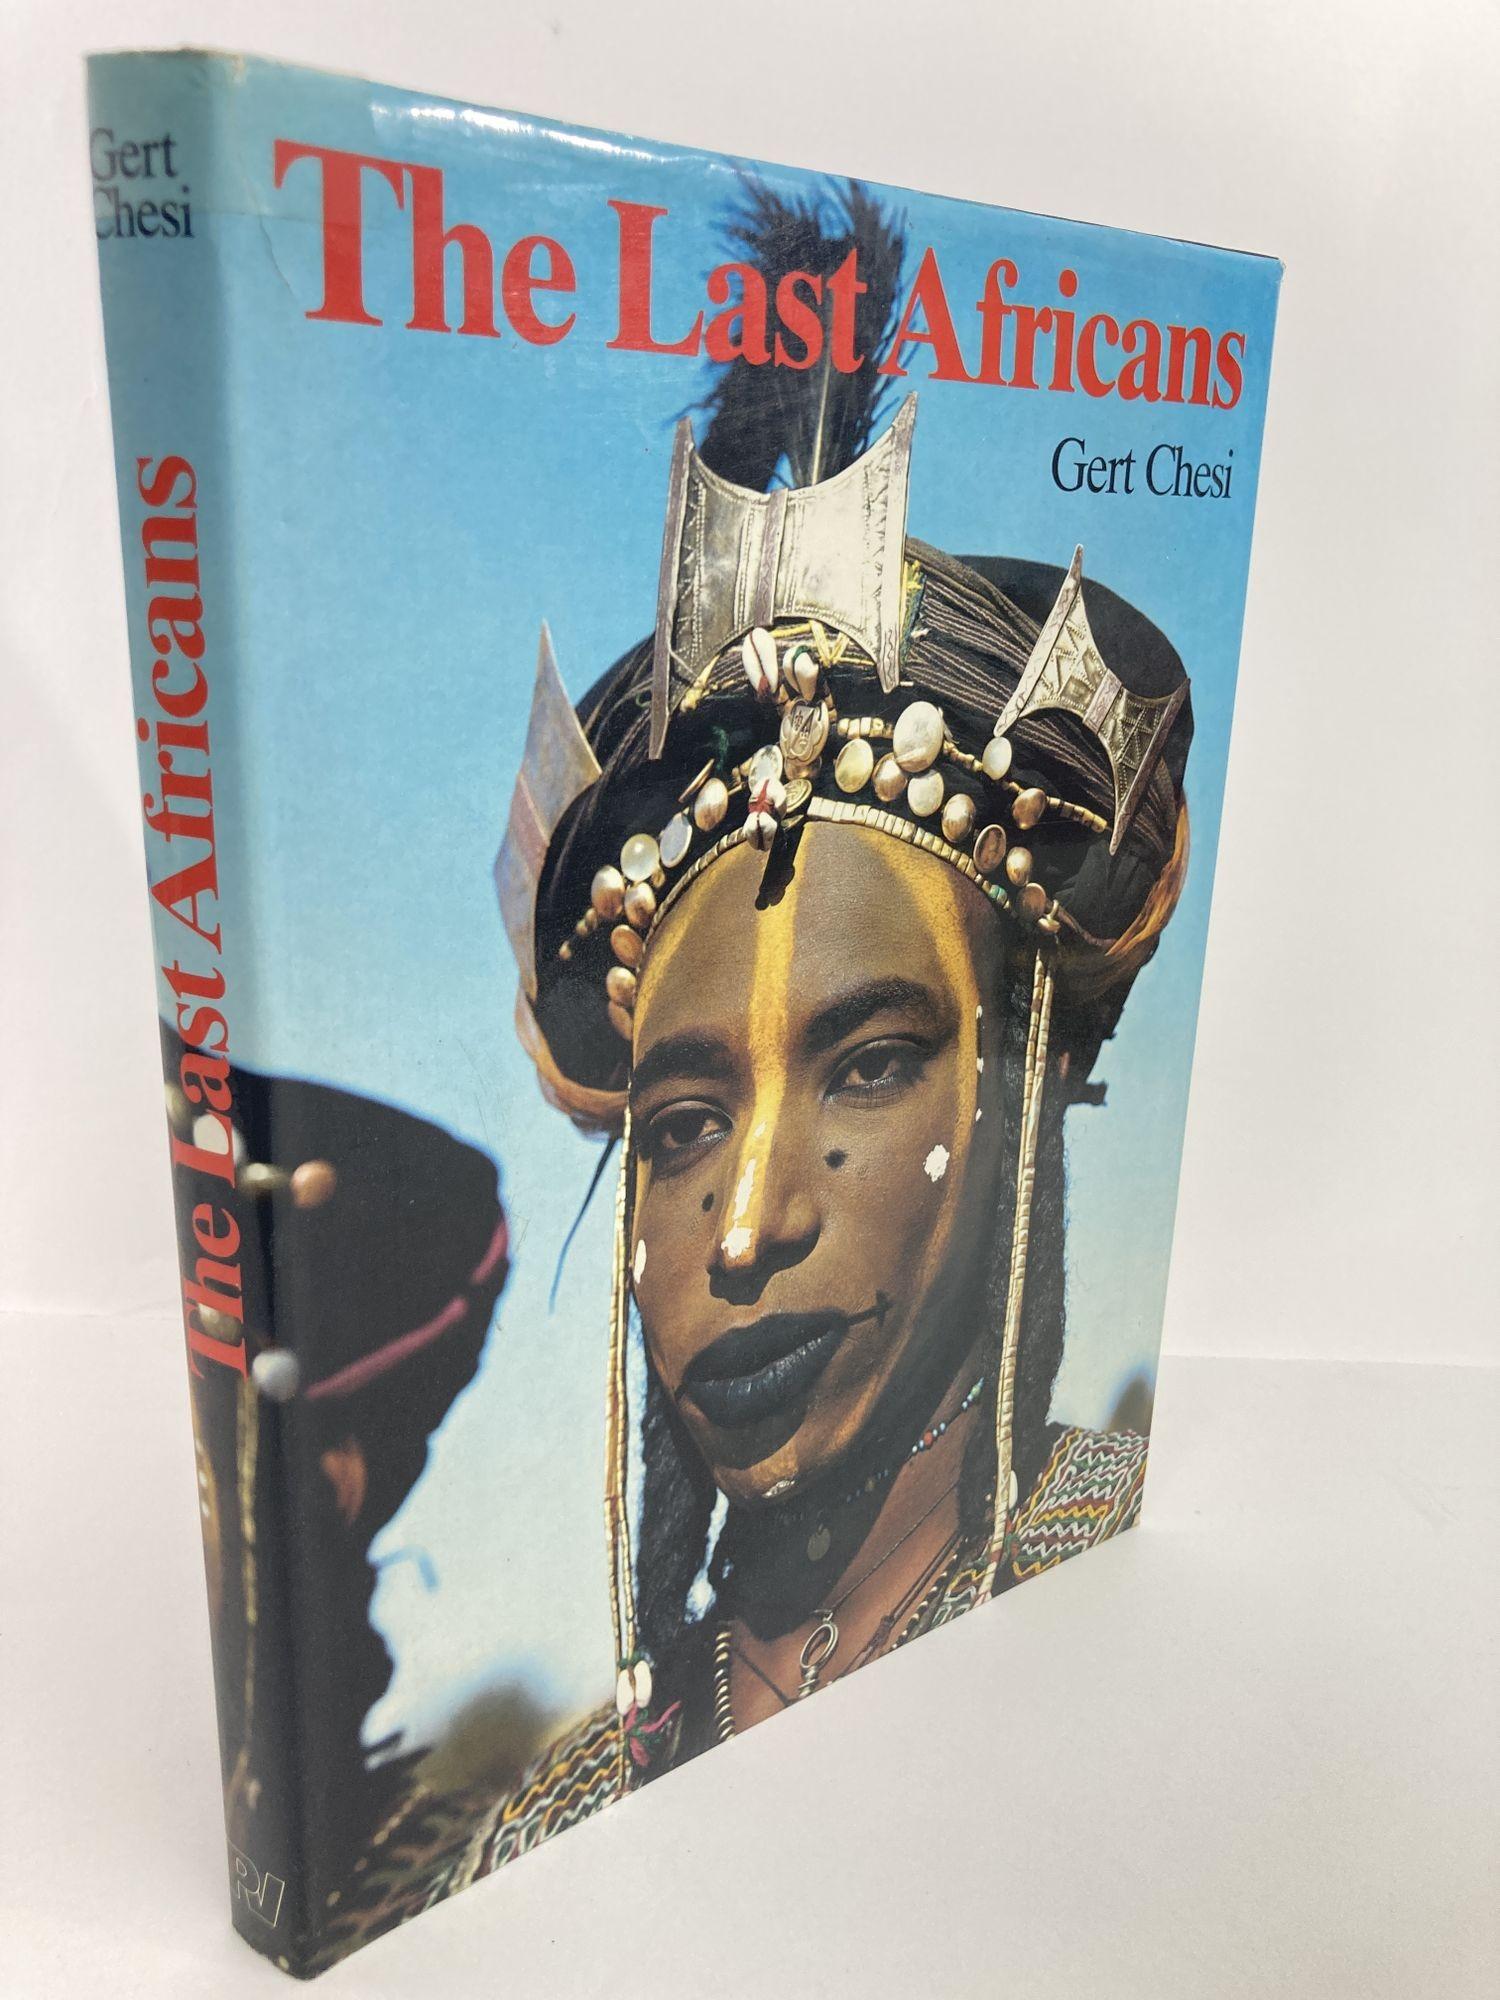 Paper The Last Africans by Gert Chesi Hardcover Book 1981 For Sale